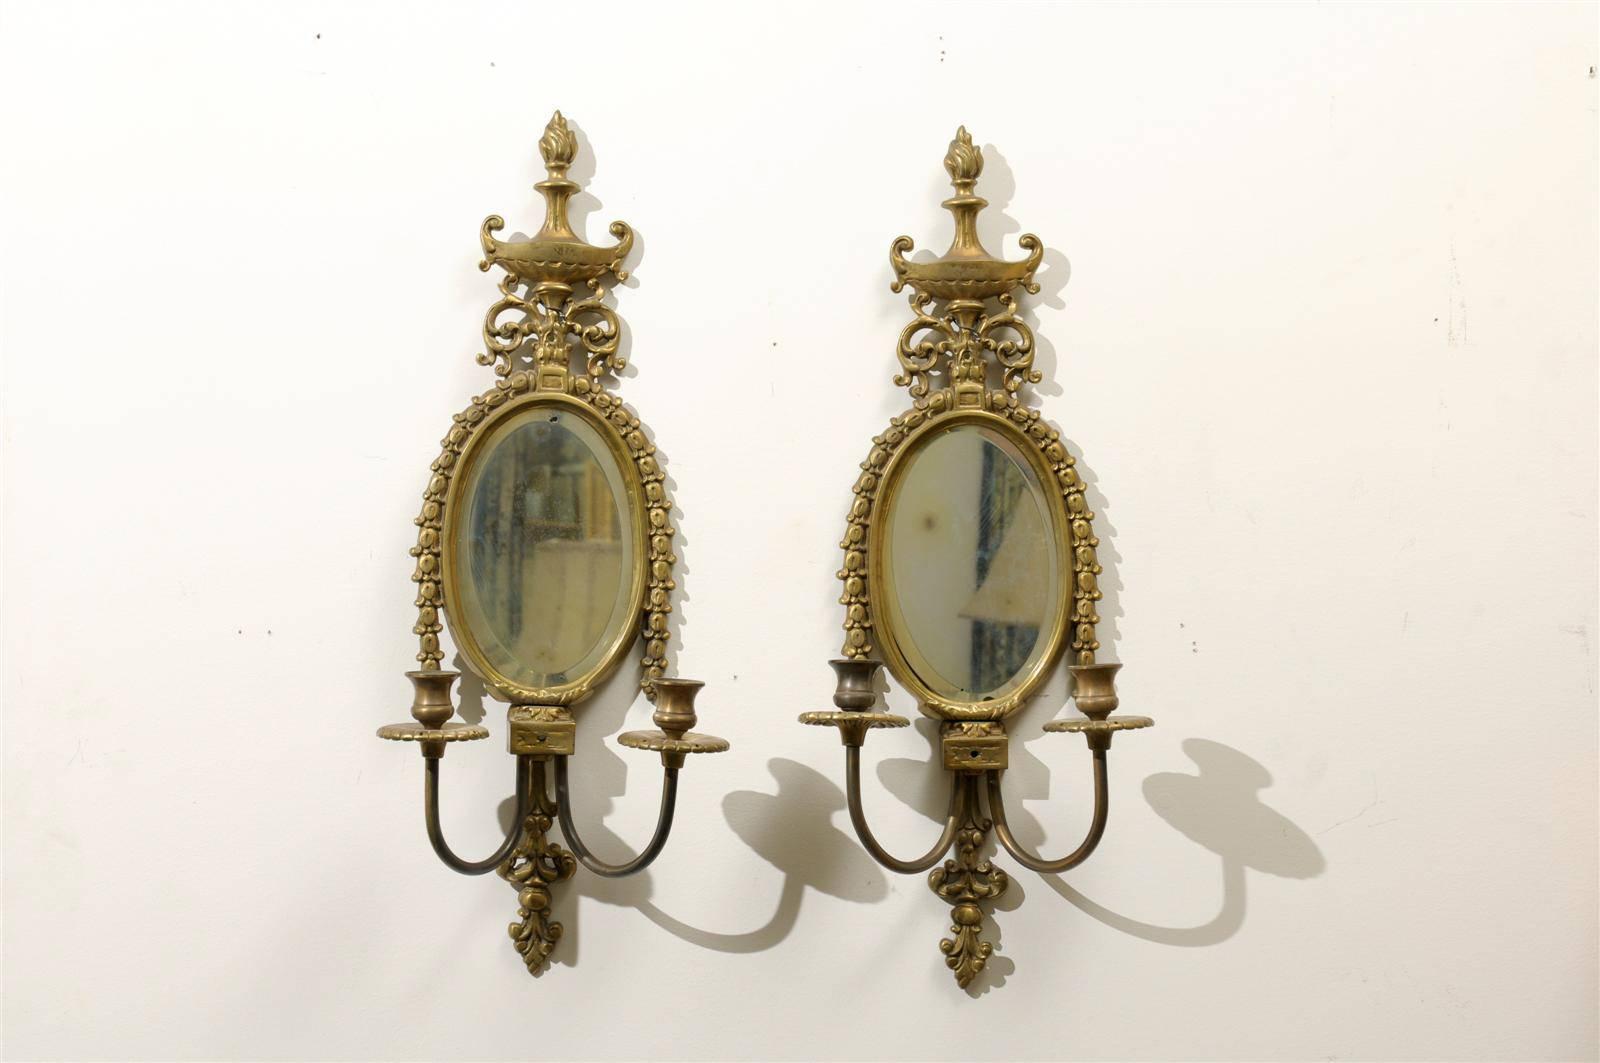 A pair of early 20th century gilded sconces with oval shape and slightly beveled mirror, ornate with two candleholders and topped with a carved fire urn and swag. These sconces are not currently wired.